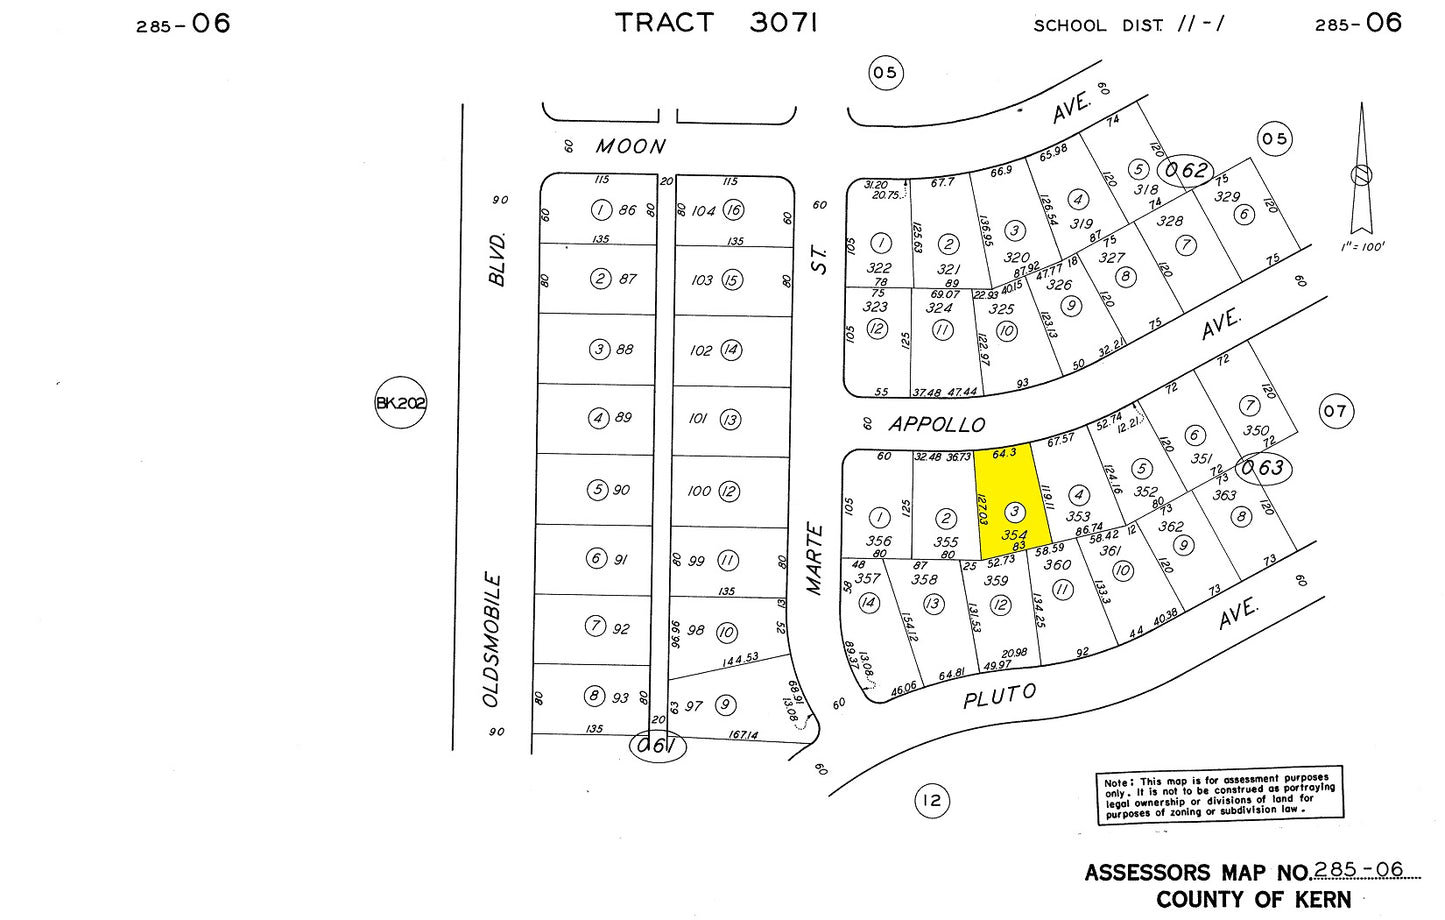 #L40031-1 .20 Acre Residential lot in California City, Kern County, CA $5,999.00 ($99.28/Month)